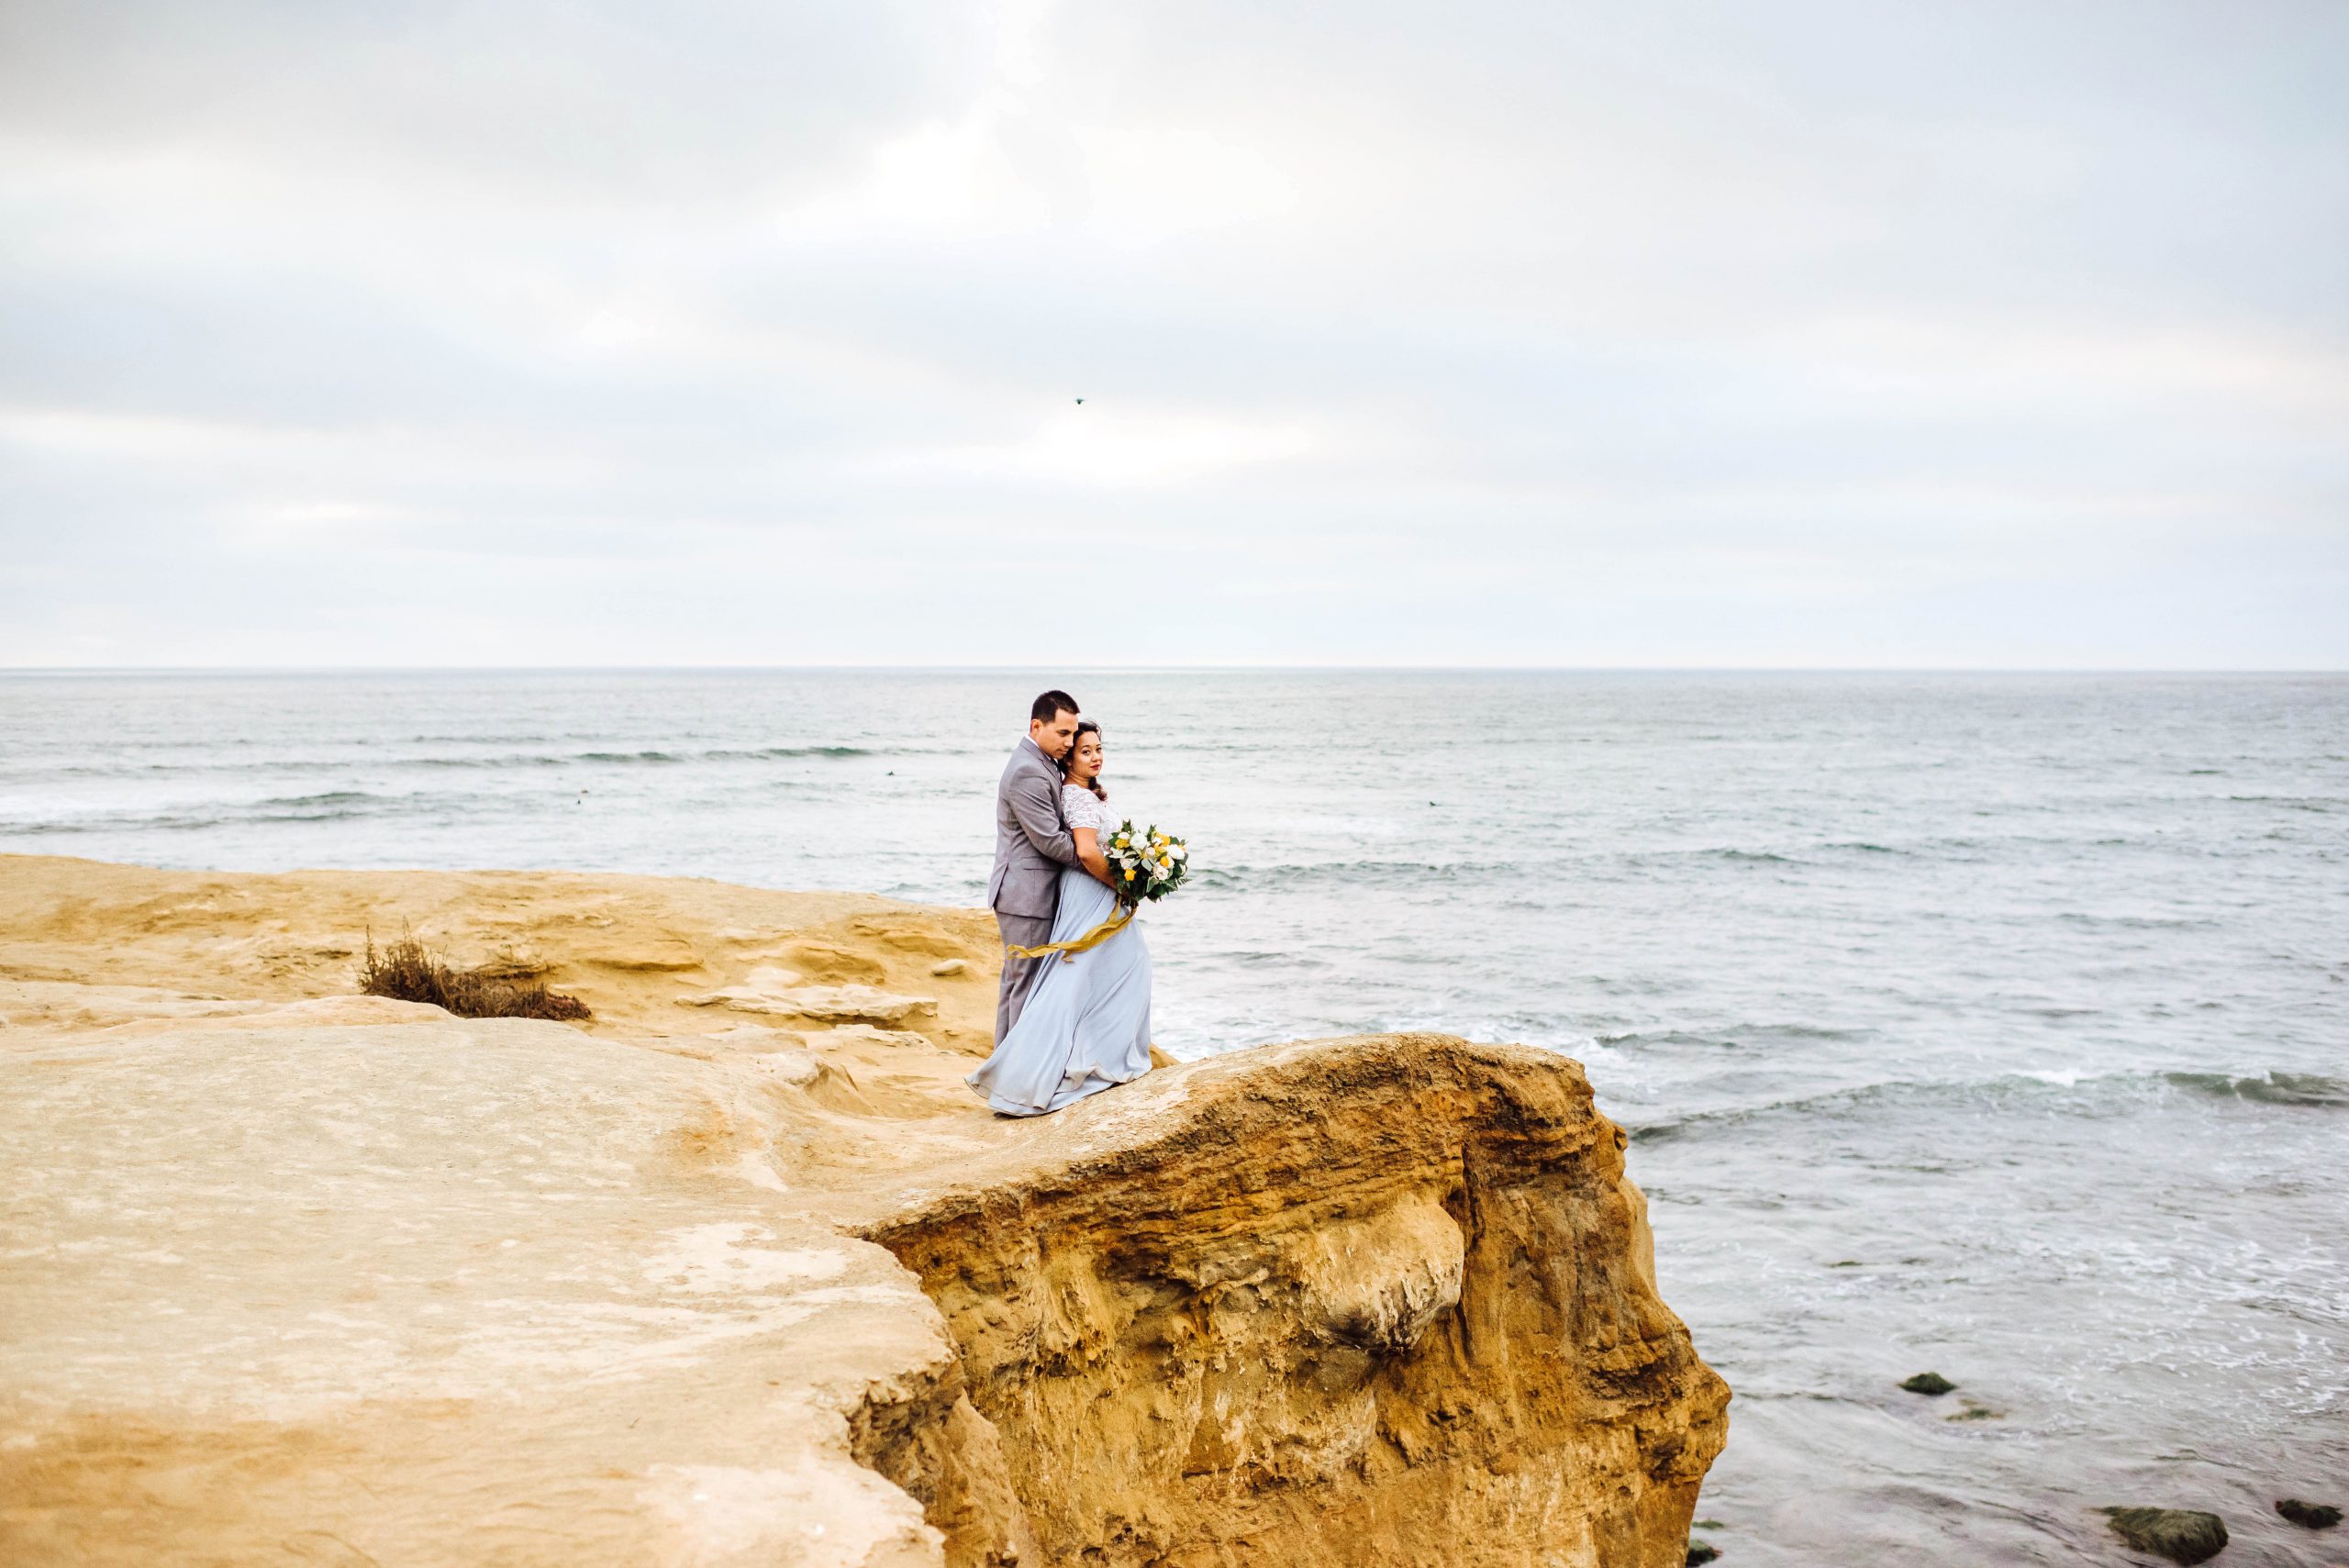 10 Year vow renewal at Sunset Cliffs in San Diego, CA